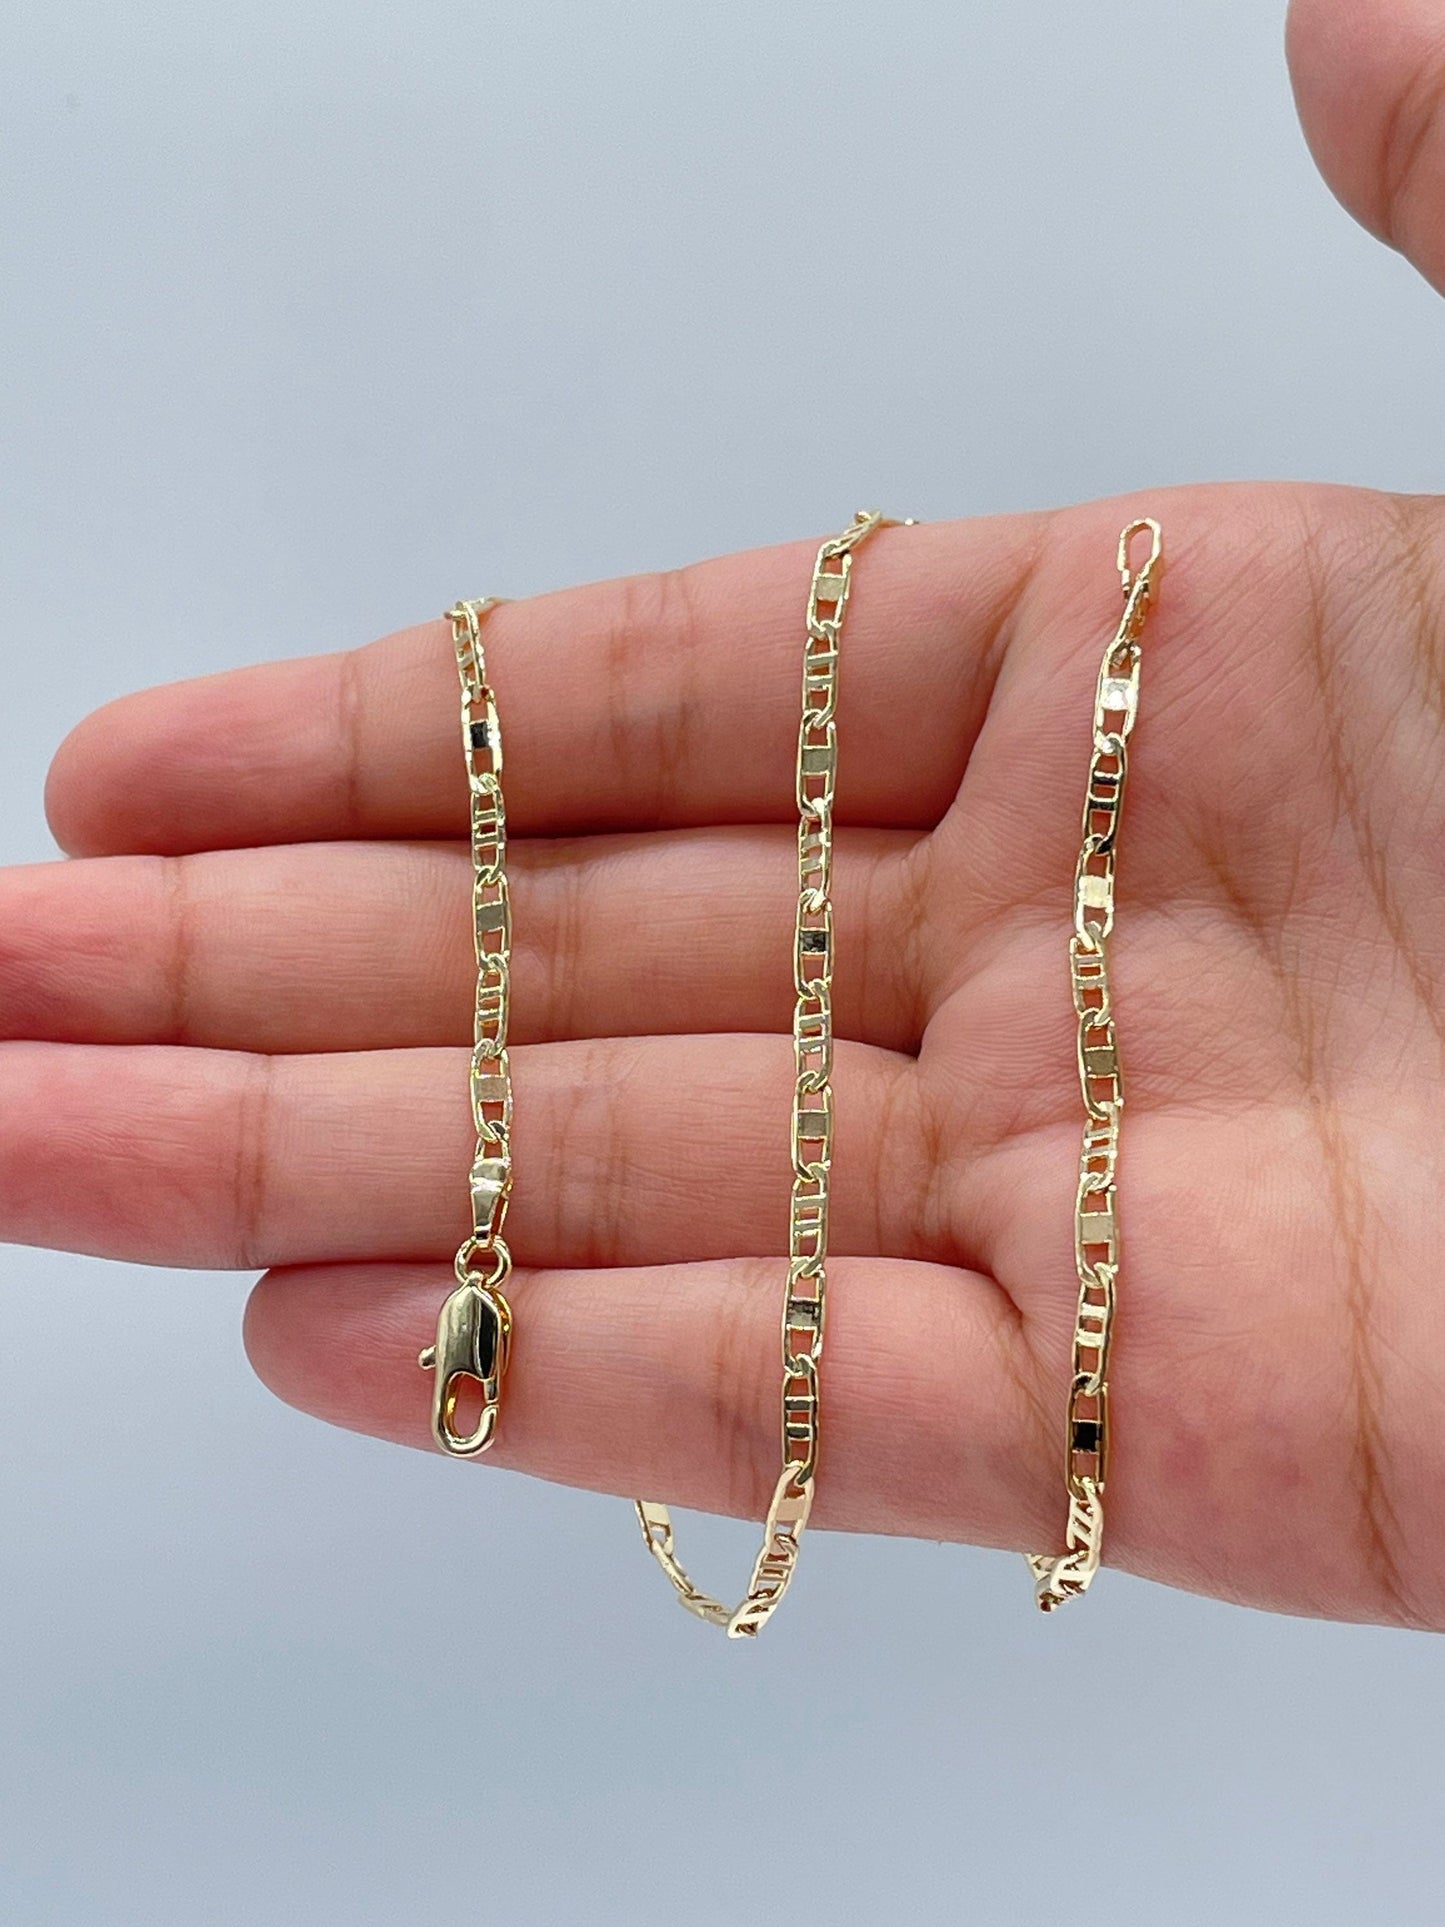 18k Gold Layered Thin Mariner Chain 3mm Necklace For Wholesale and Jewelry